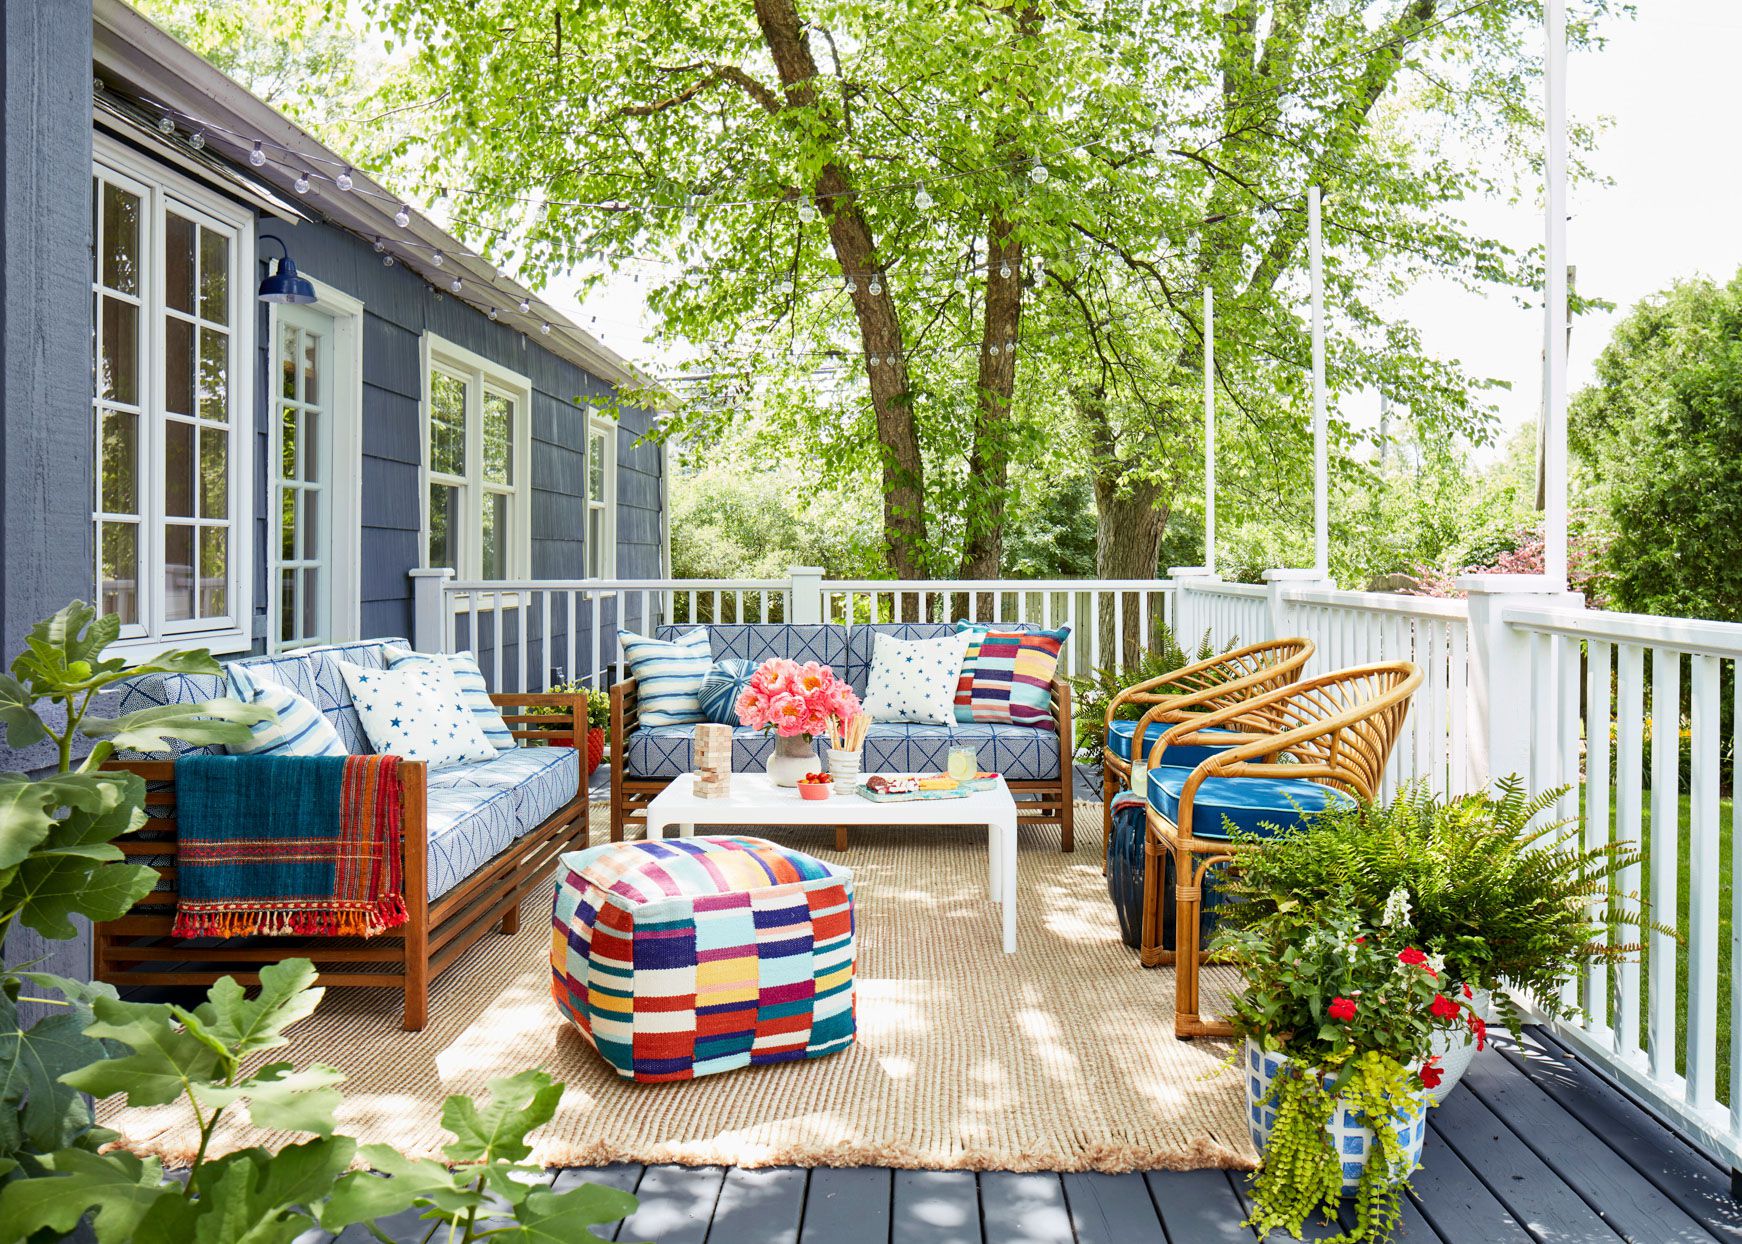 Painted patio ideas – 11 colorful and creative ways to update your outdoor living space